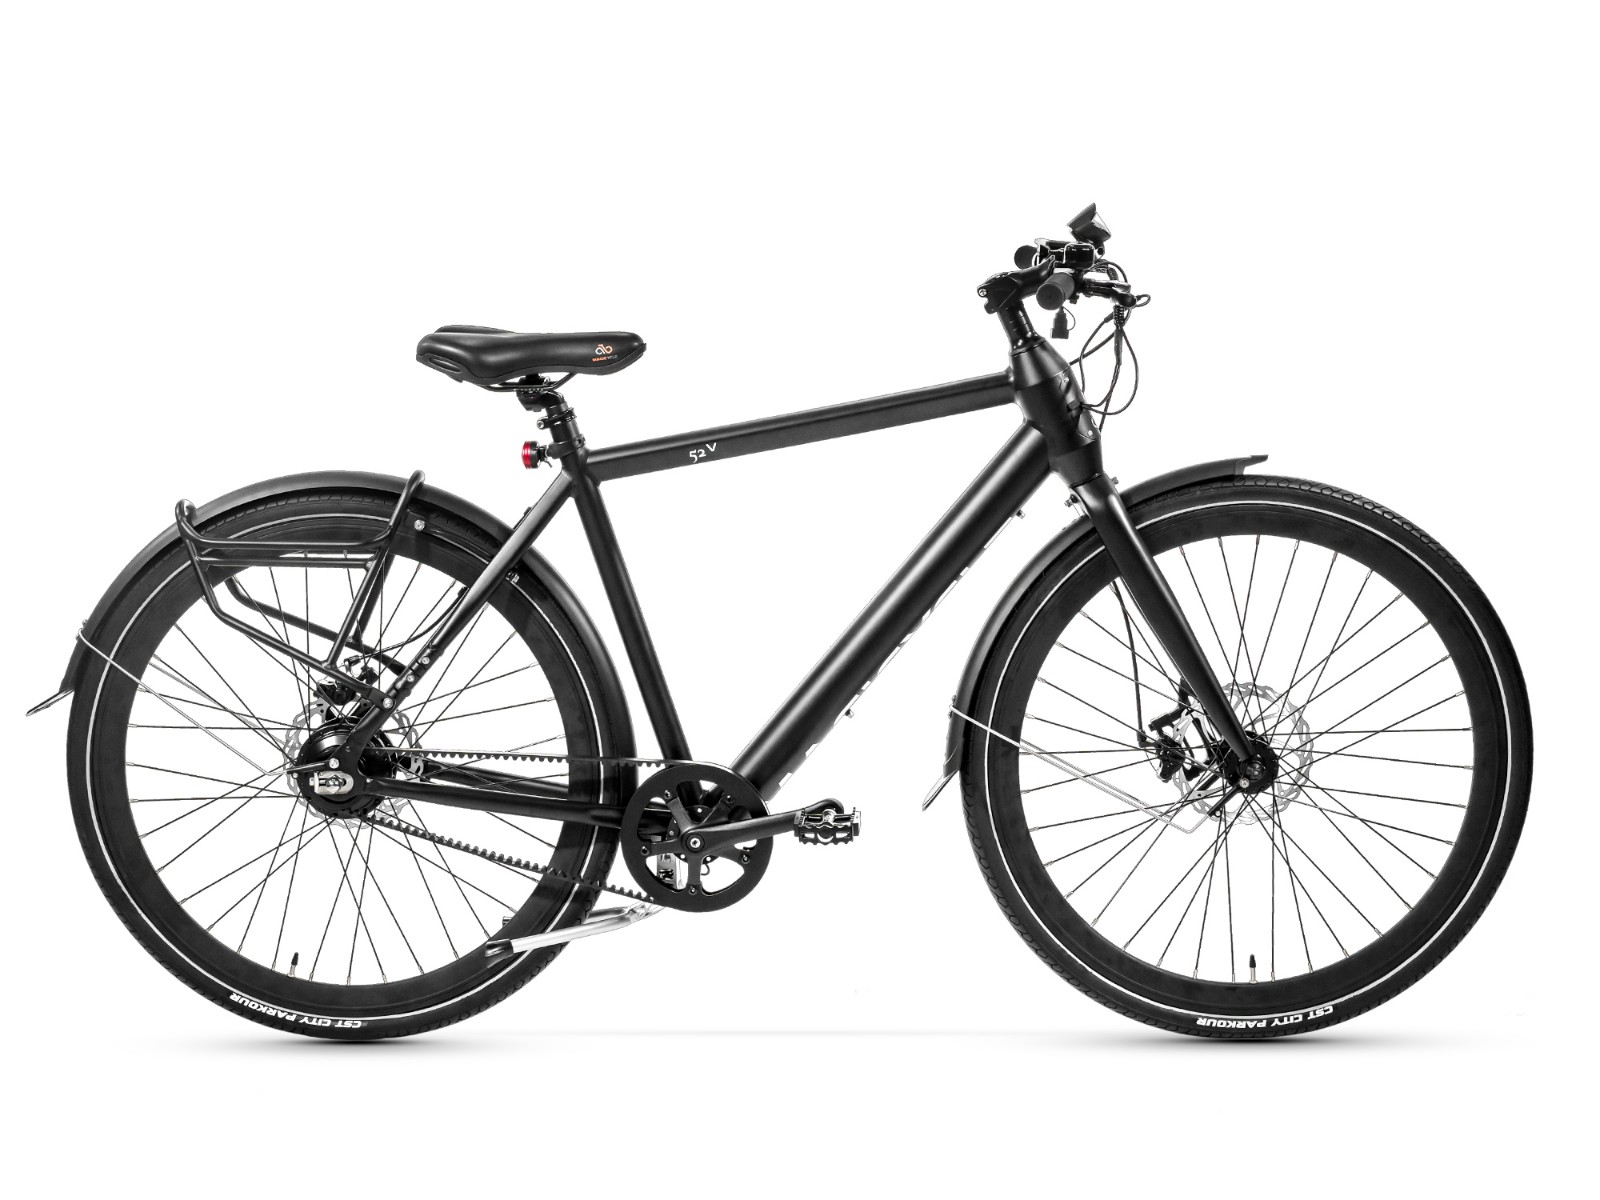 Magicycle Commuter  Step Over Lightweight Electric Bike